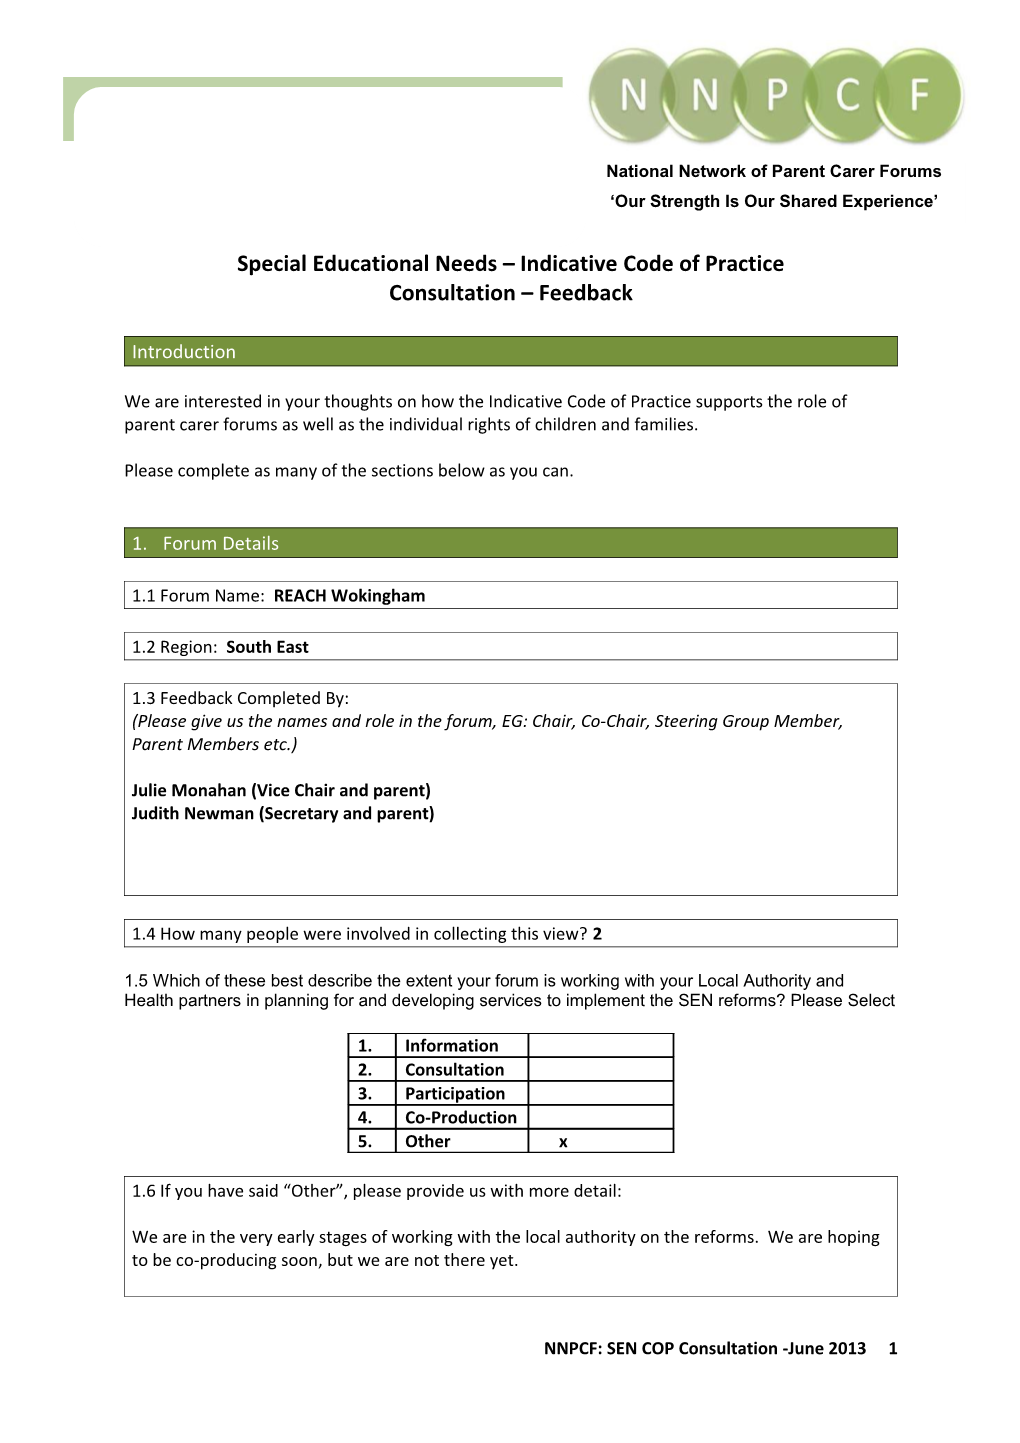 Special Educational Needs Indicative Code of Practice